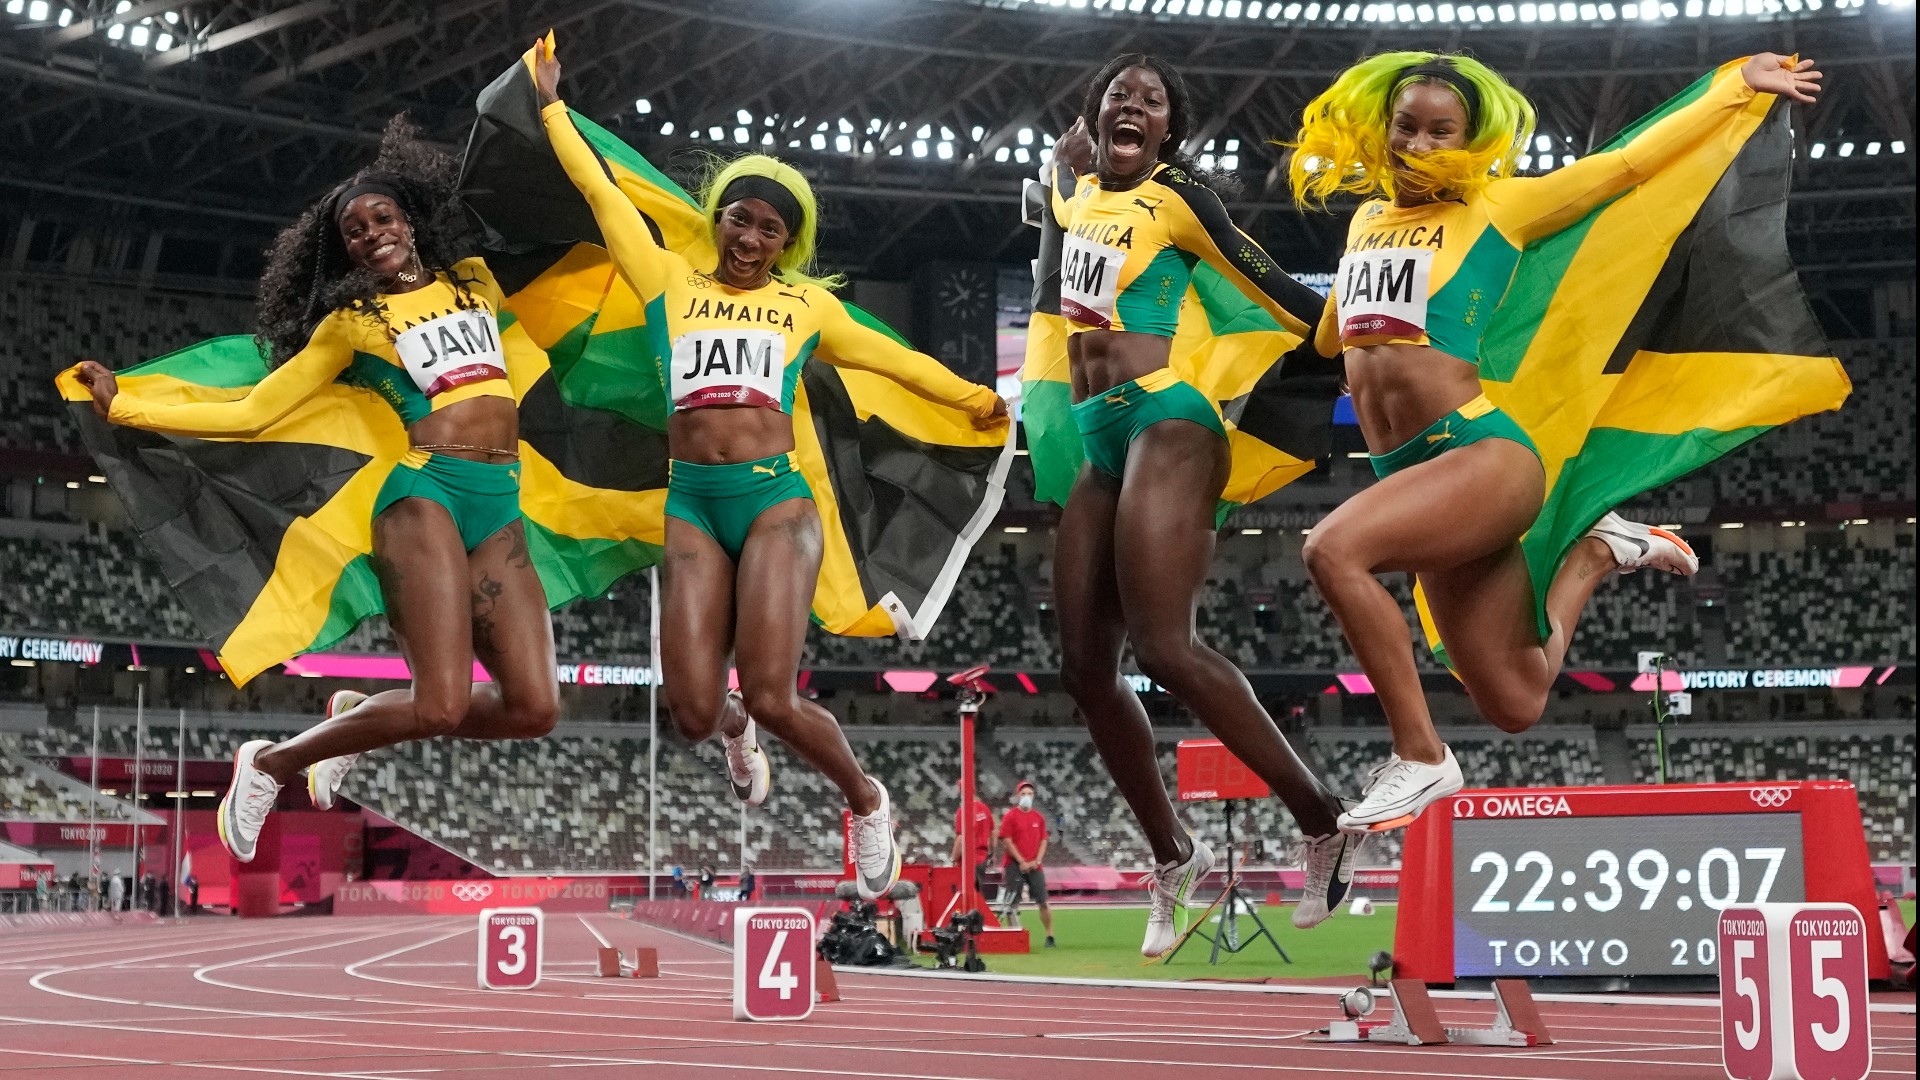 Jamaicans win women’s 4x100 relay, US gets silver